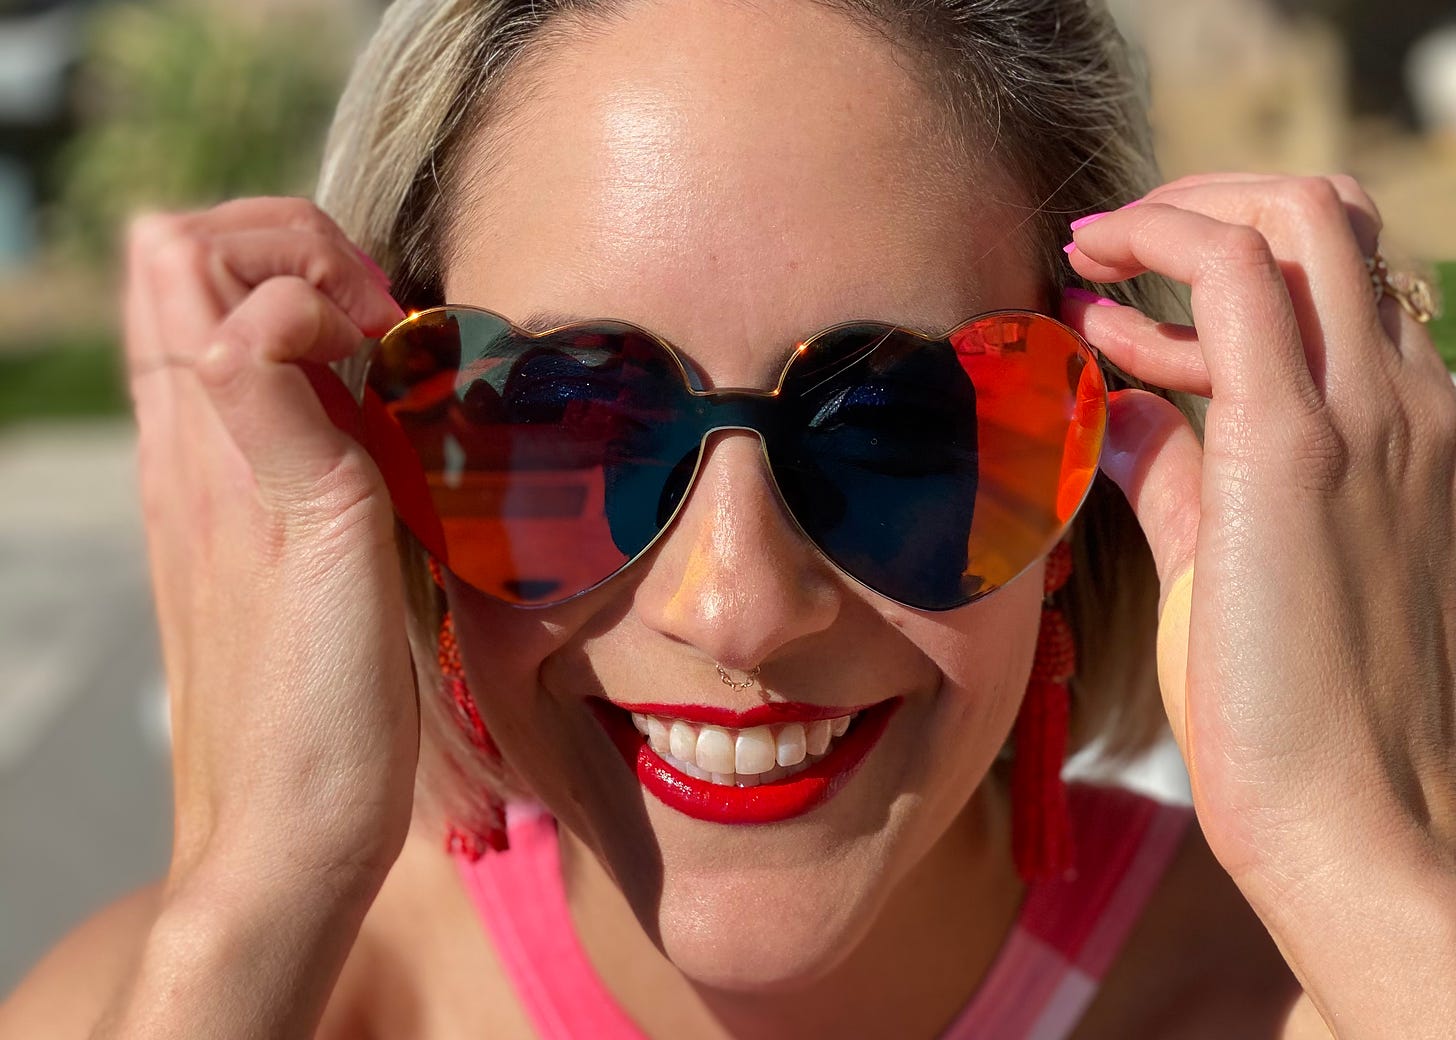 A woman with red lipstick smiles widely as she touches her red, heart-shaped sunglasses